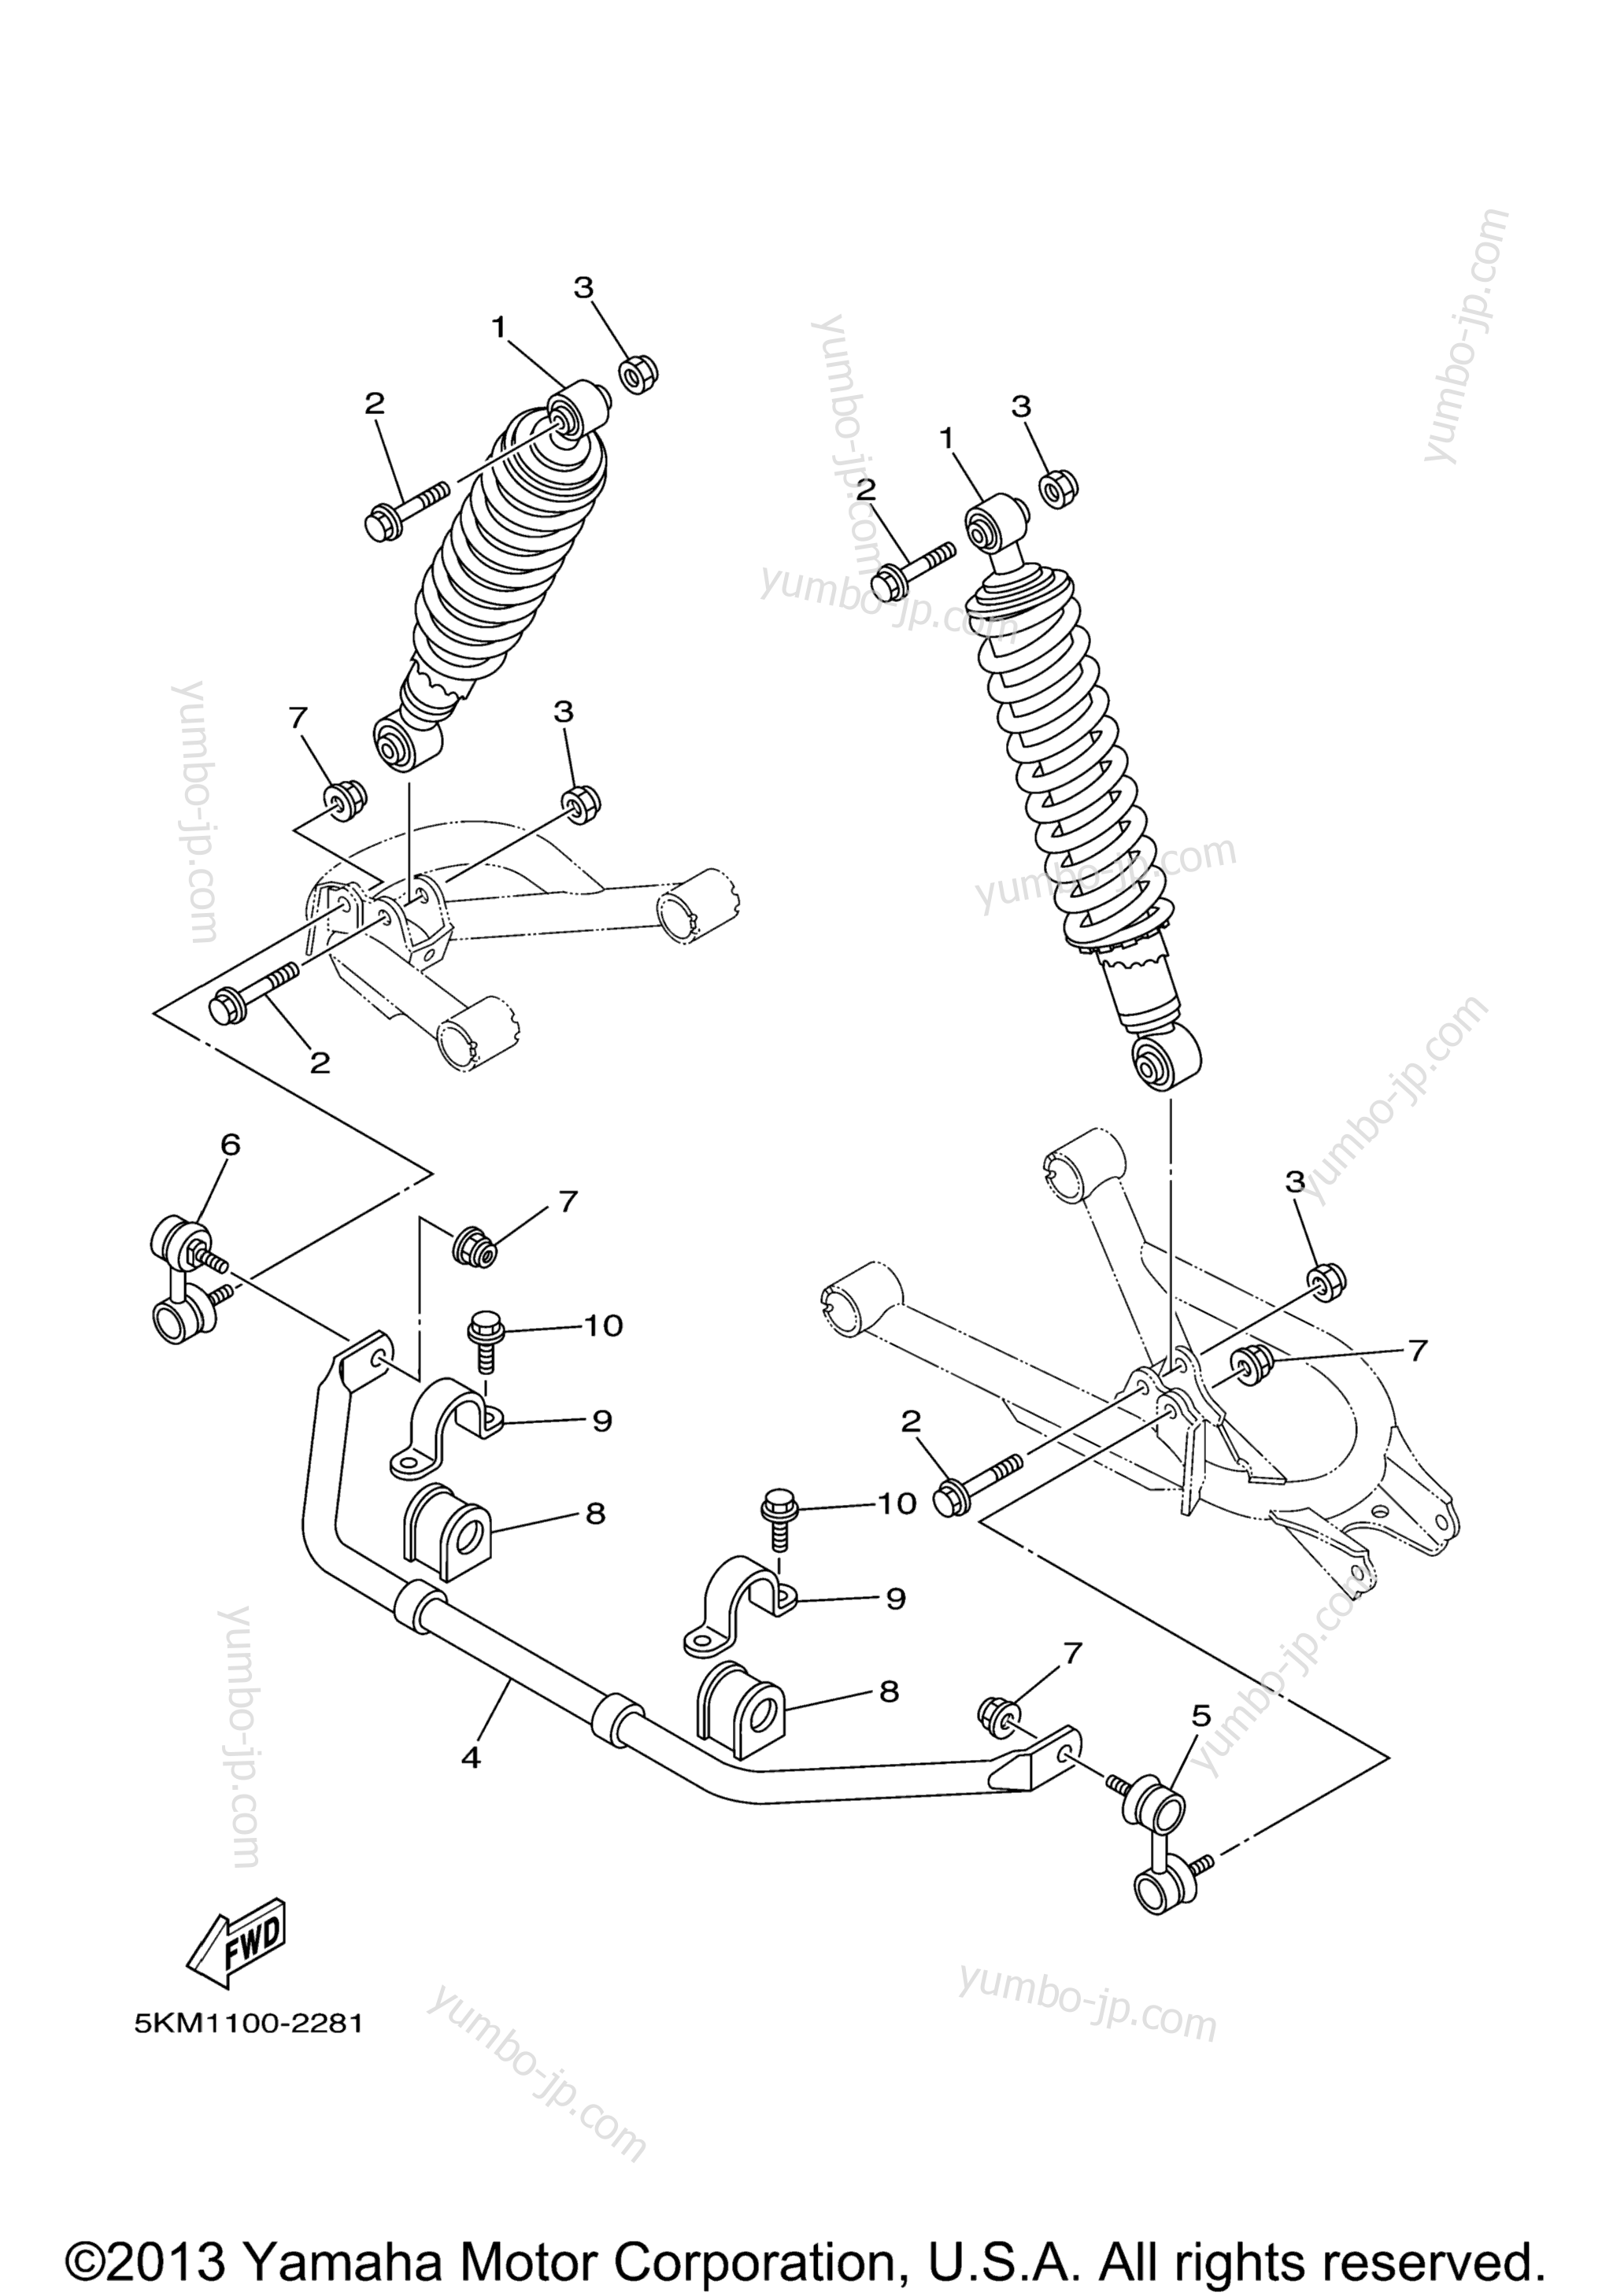 Rear Suspension for ATVs YAMAHA GRIZZLY 660 (YFM66FGXR) 2008 year